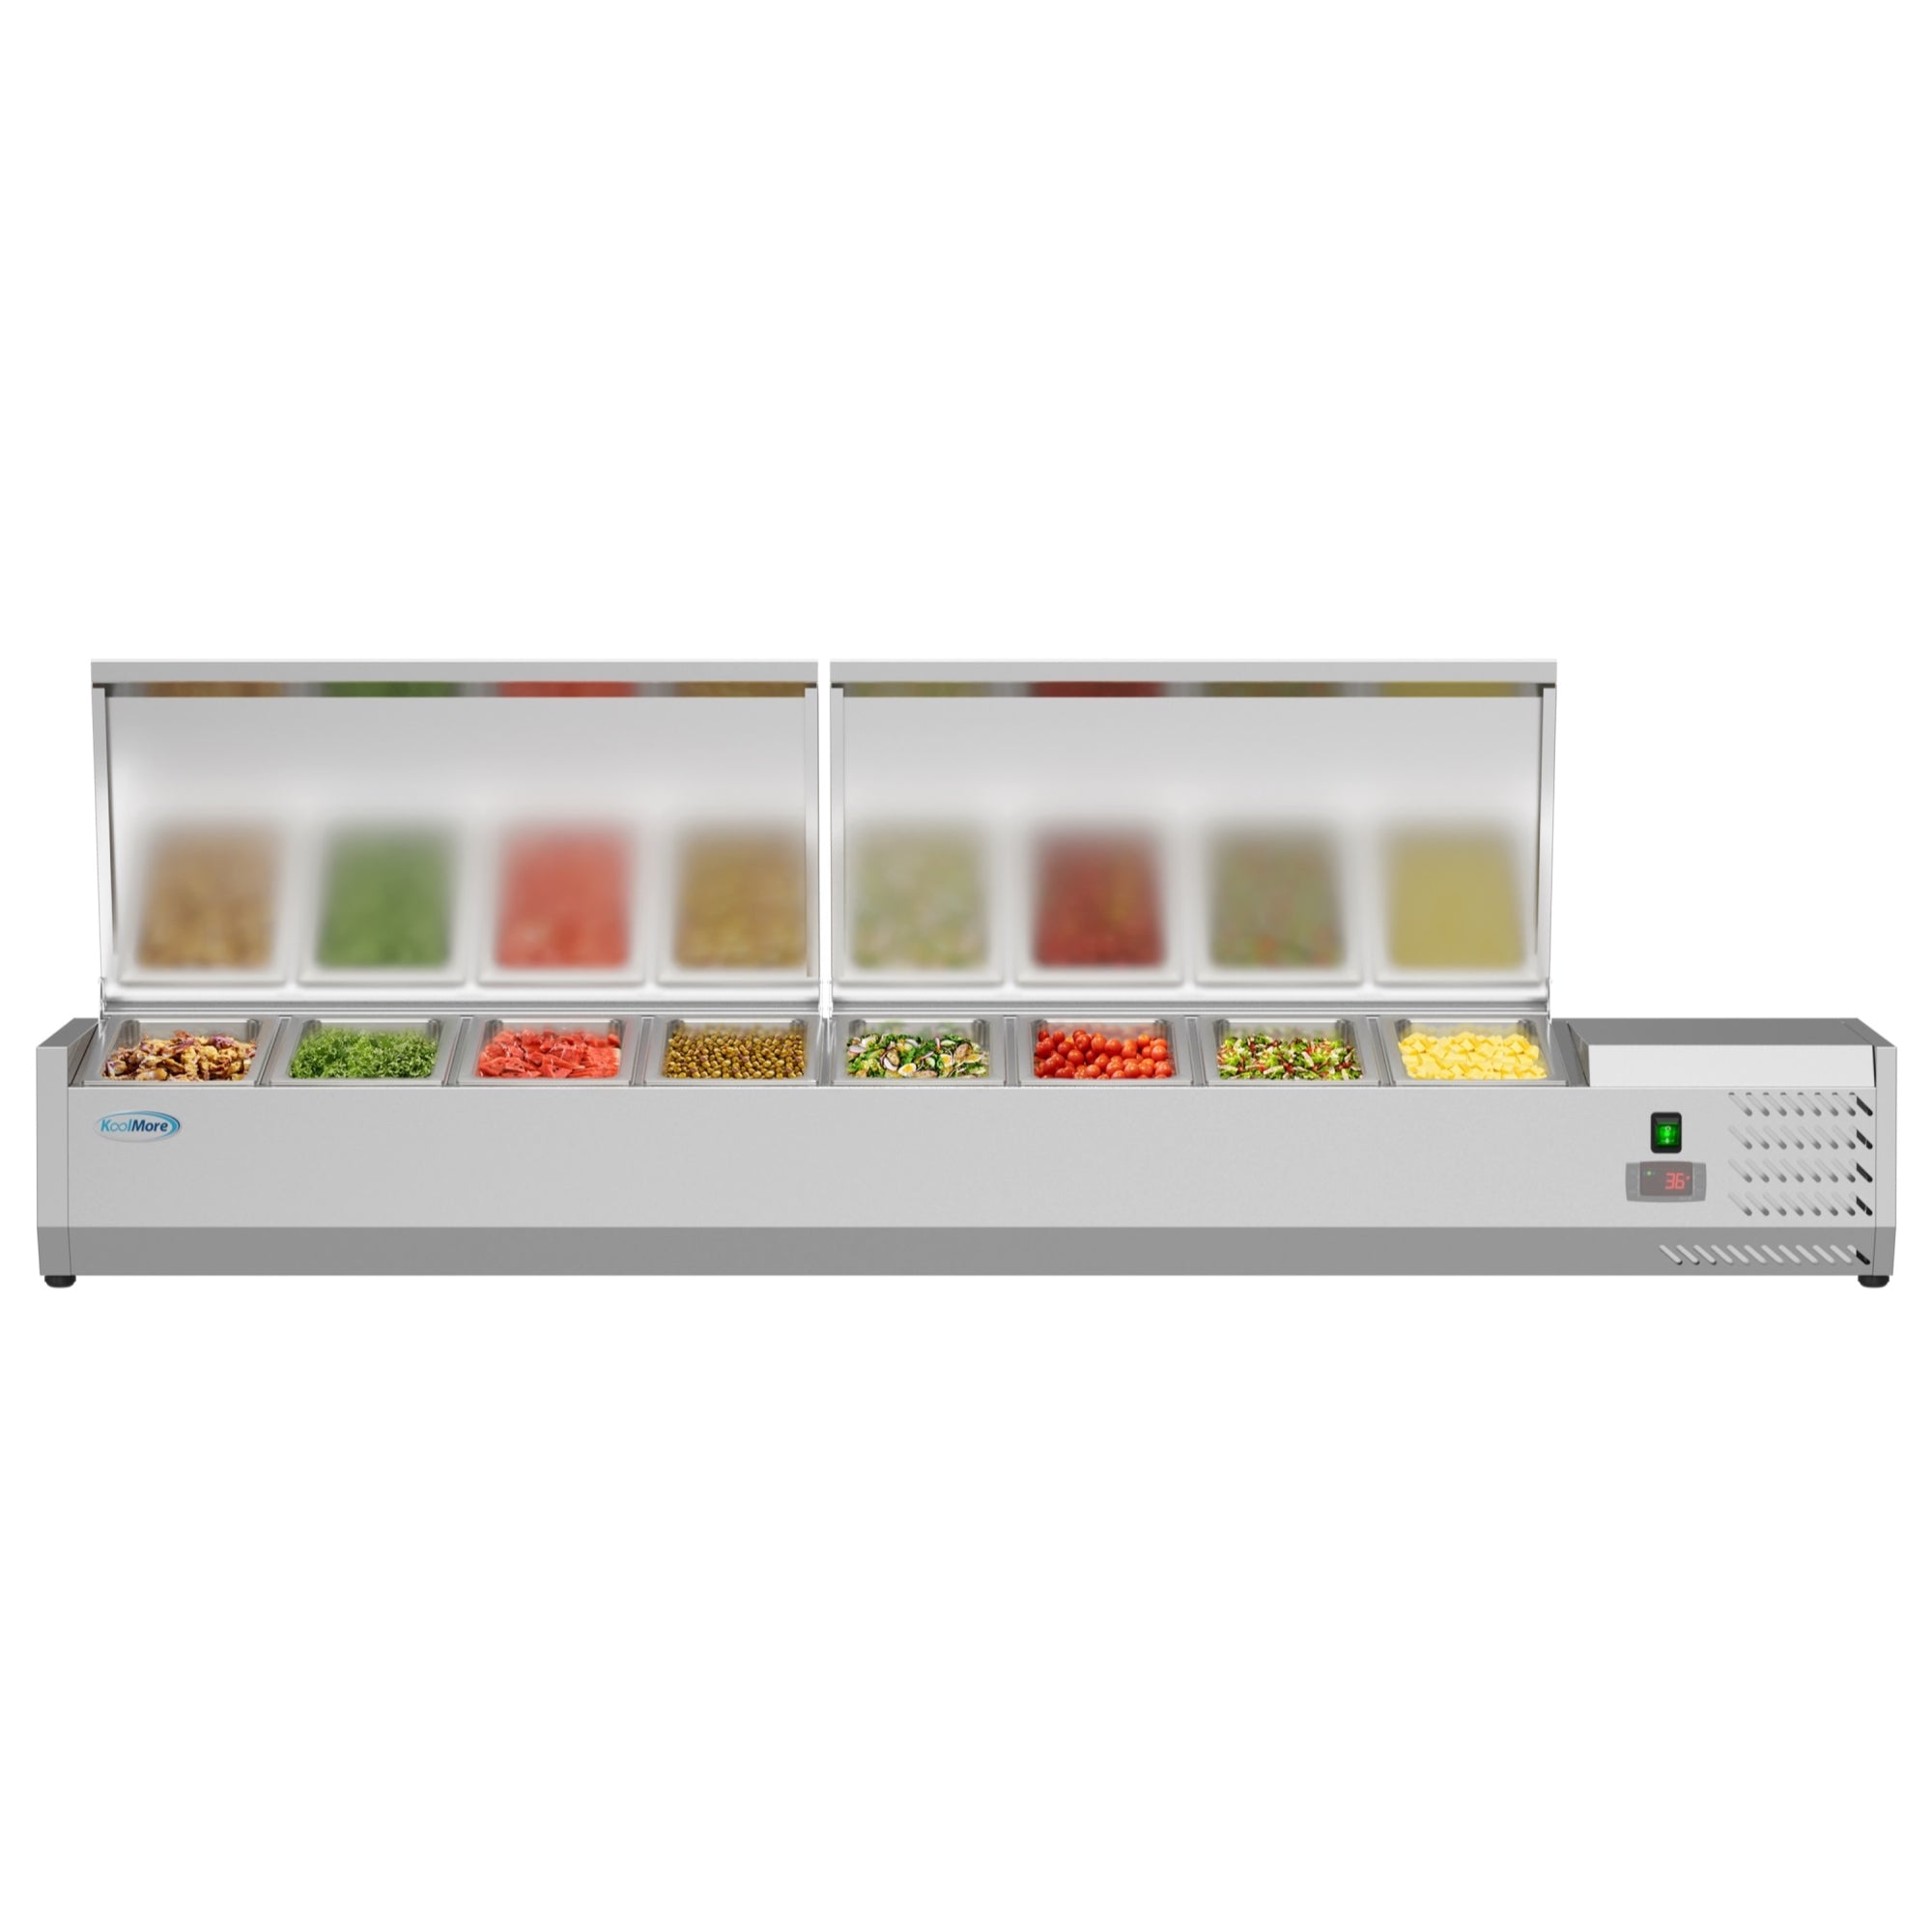 Koolmore 60 in. W 15 cu. ft. Refrigerated Food Prep Station Table